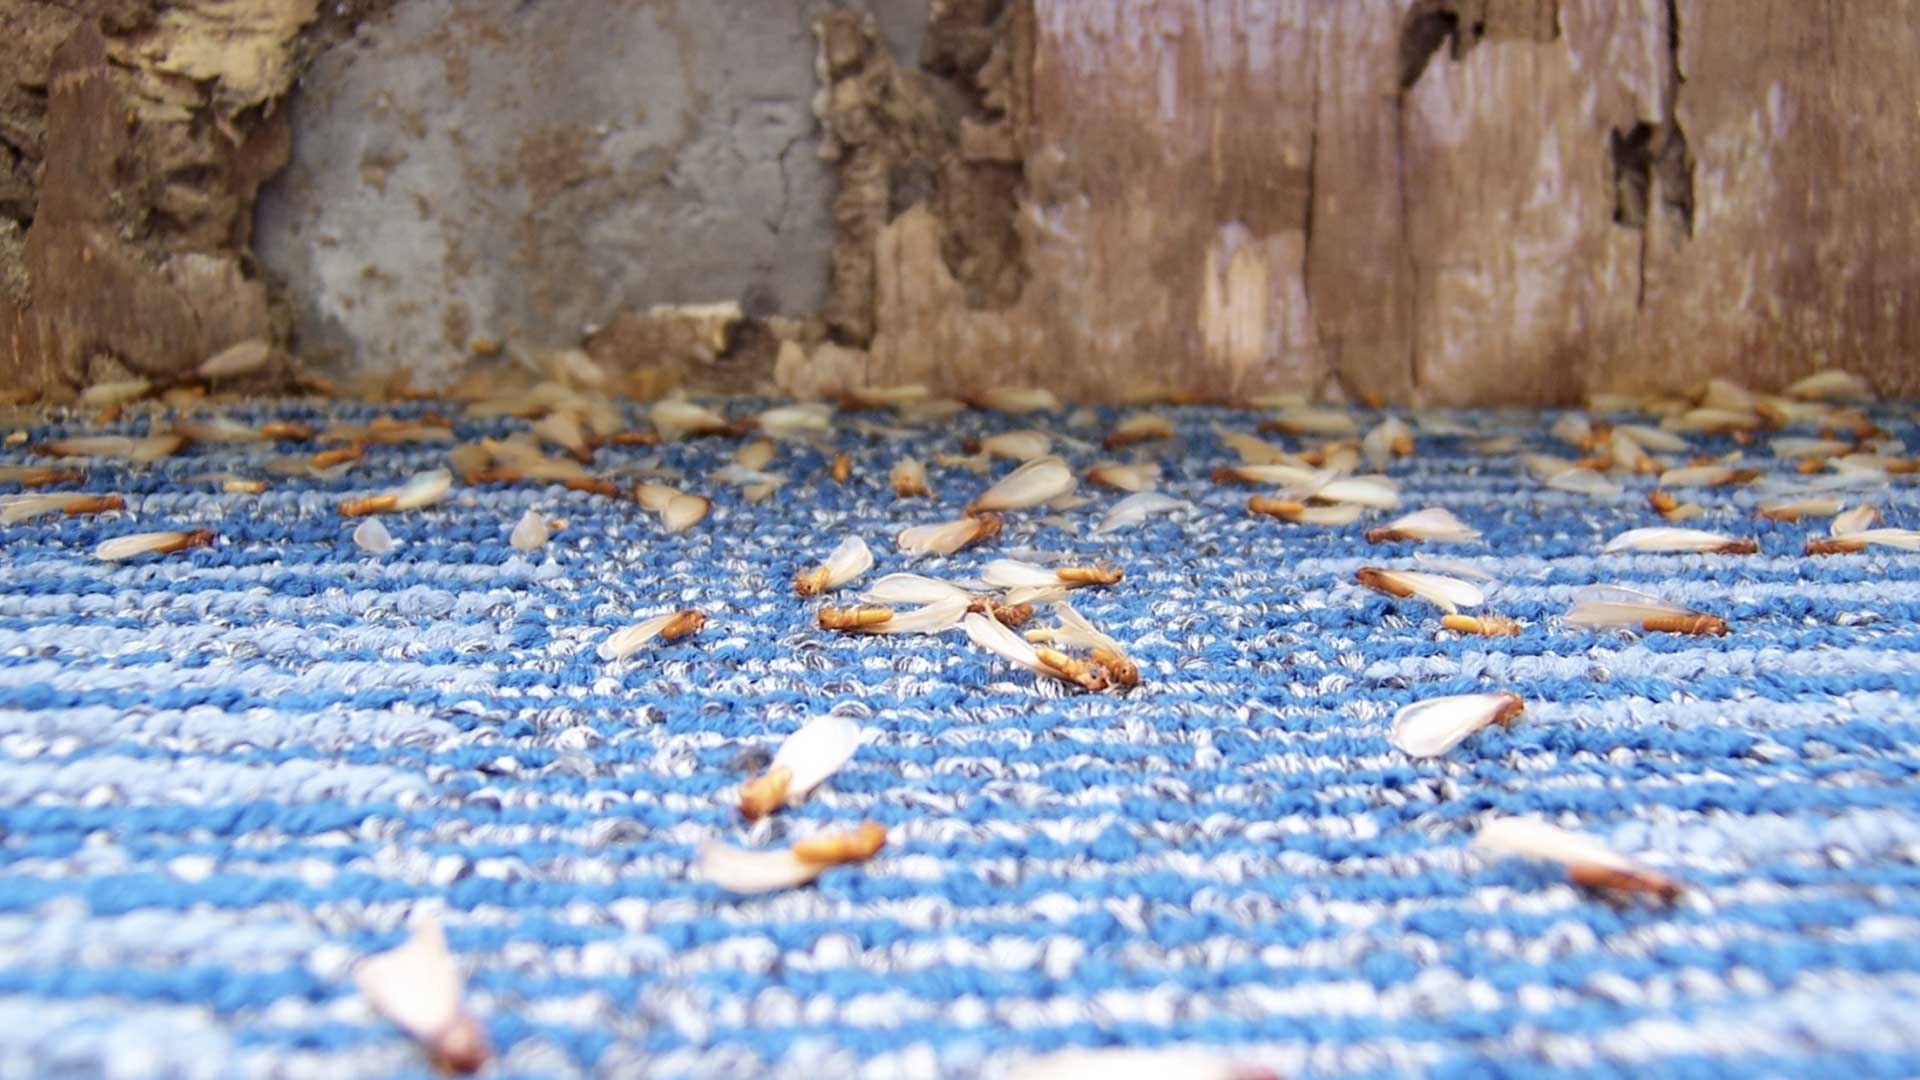 dead termites on floor by rotted wood